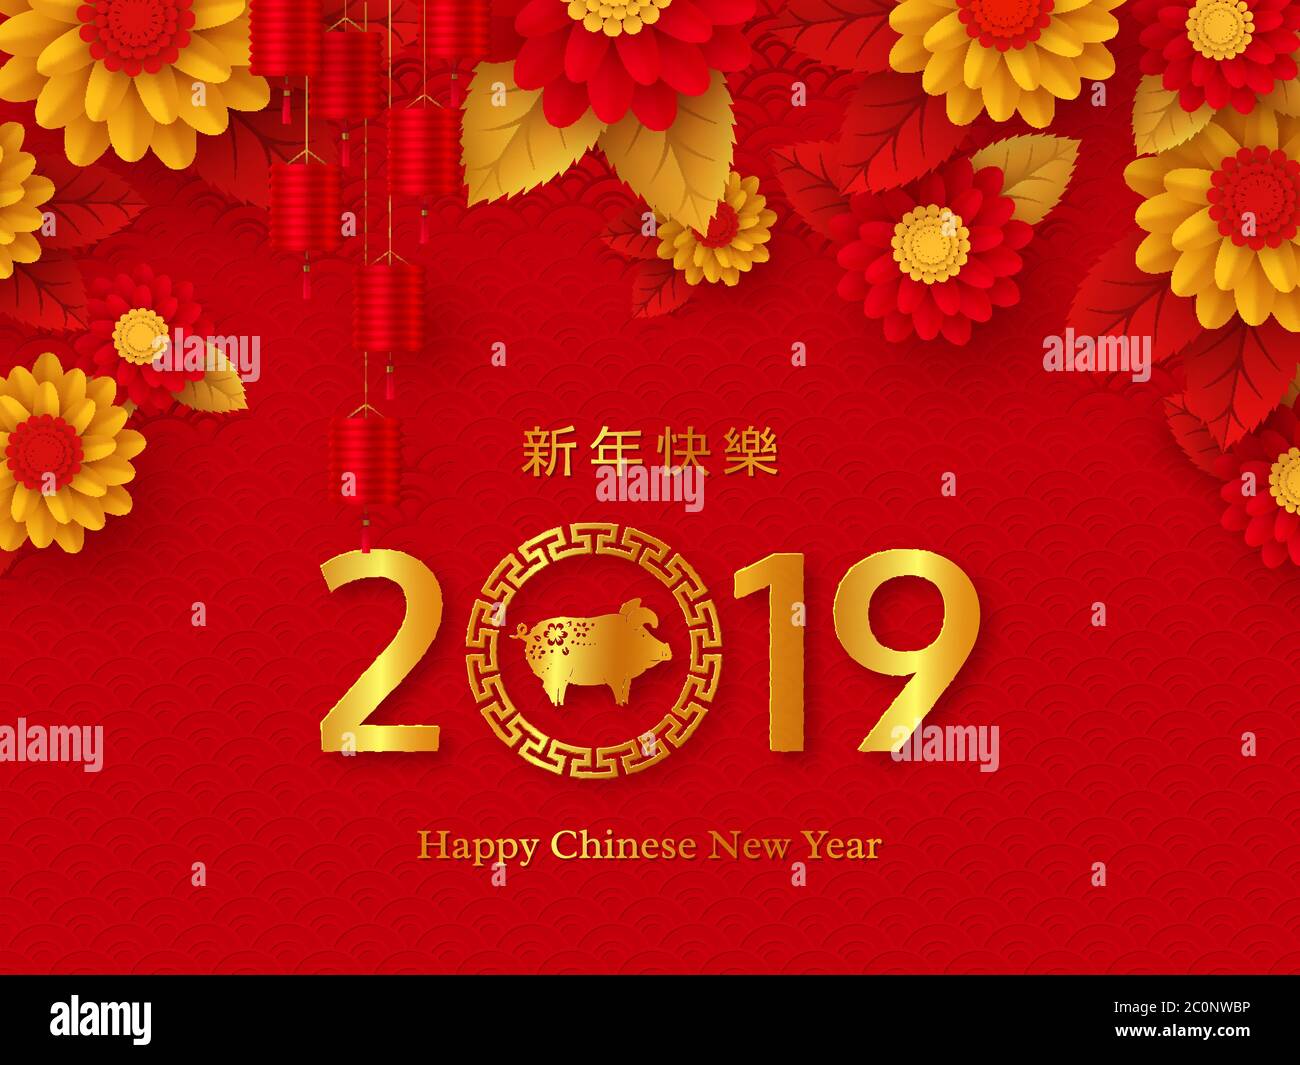 Chinese New Year holiday design. Stock Vector